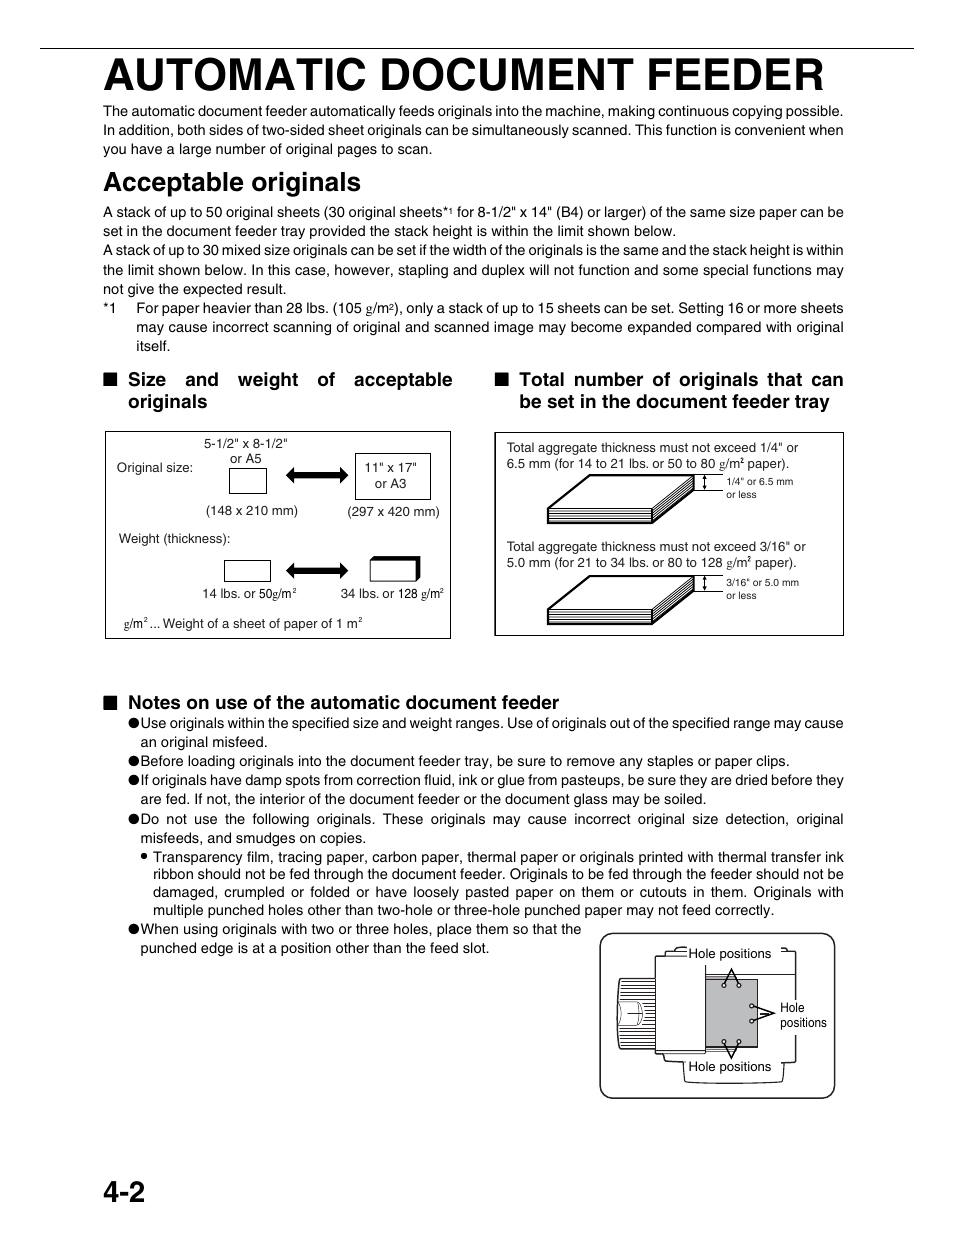 Automatic document feeder, Acceptable originals | Sharp AR-M455N User Manual | Page 81 / 183